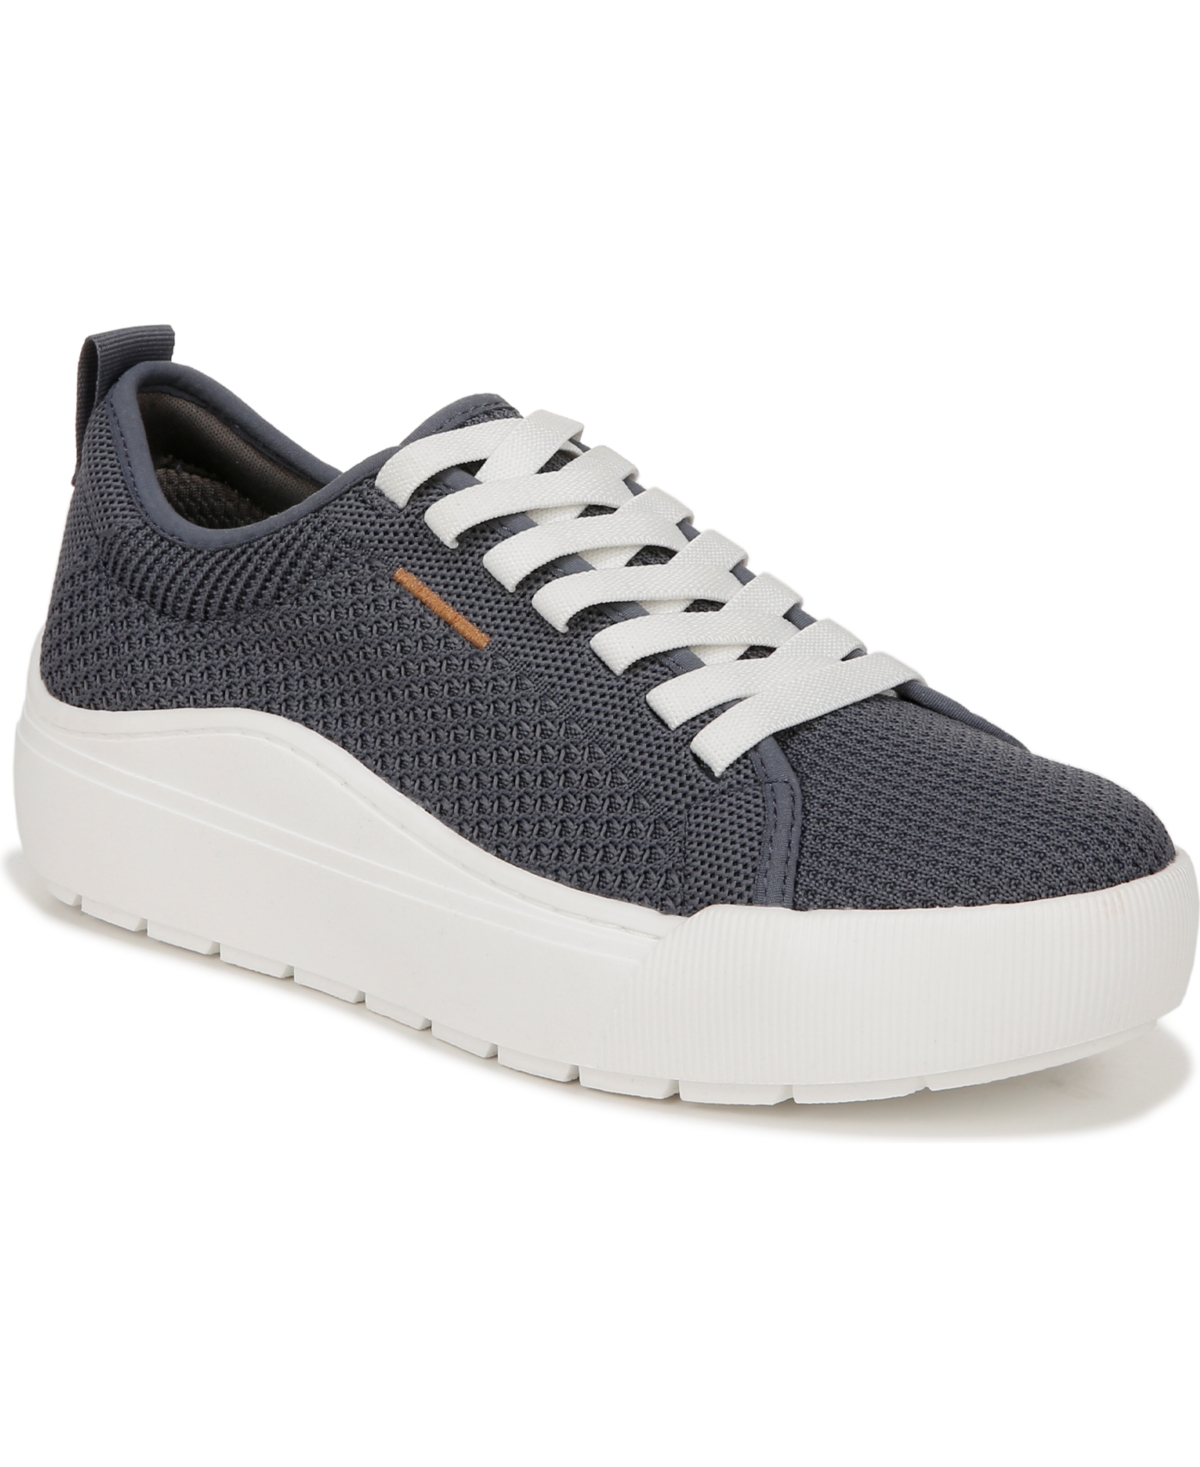 Women's Time Off Knit Platform Sneakers - Oxide Blue Knit Fabric